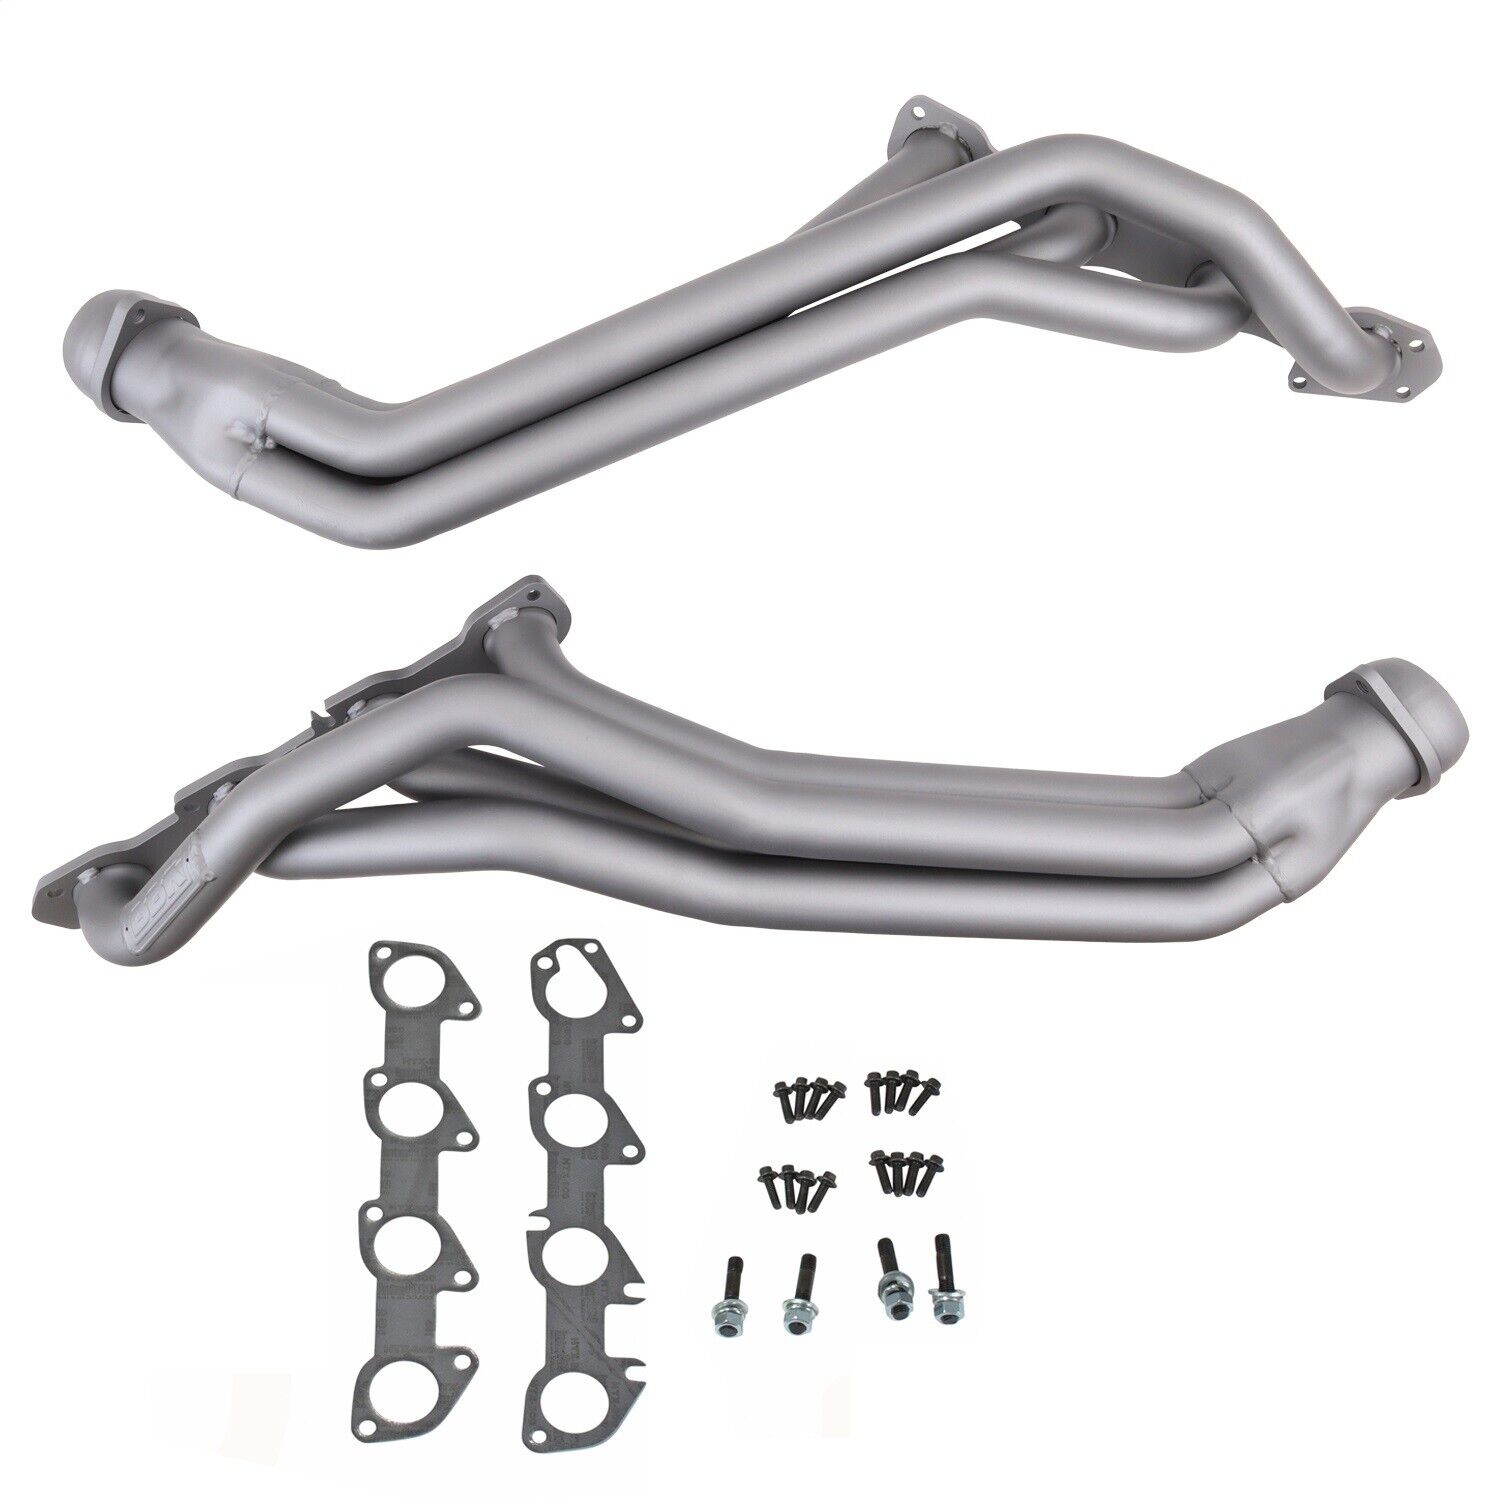 BBK Performance 4046 Long Tube Exhaust Header Fits 09-23 Challenger Charger